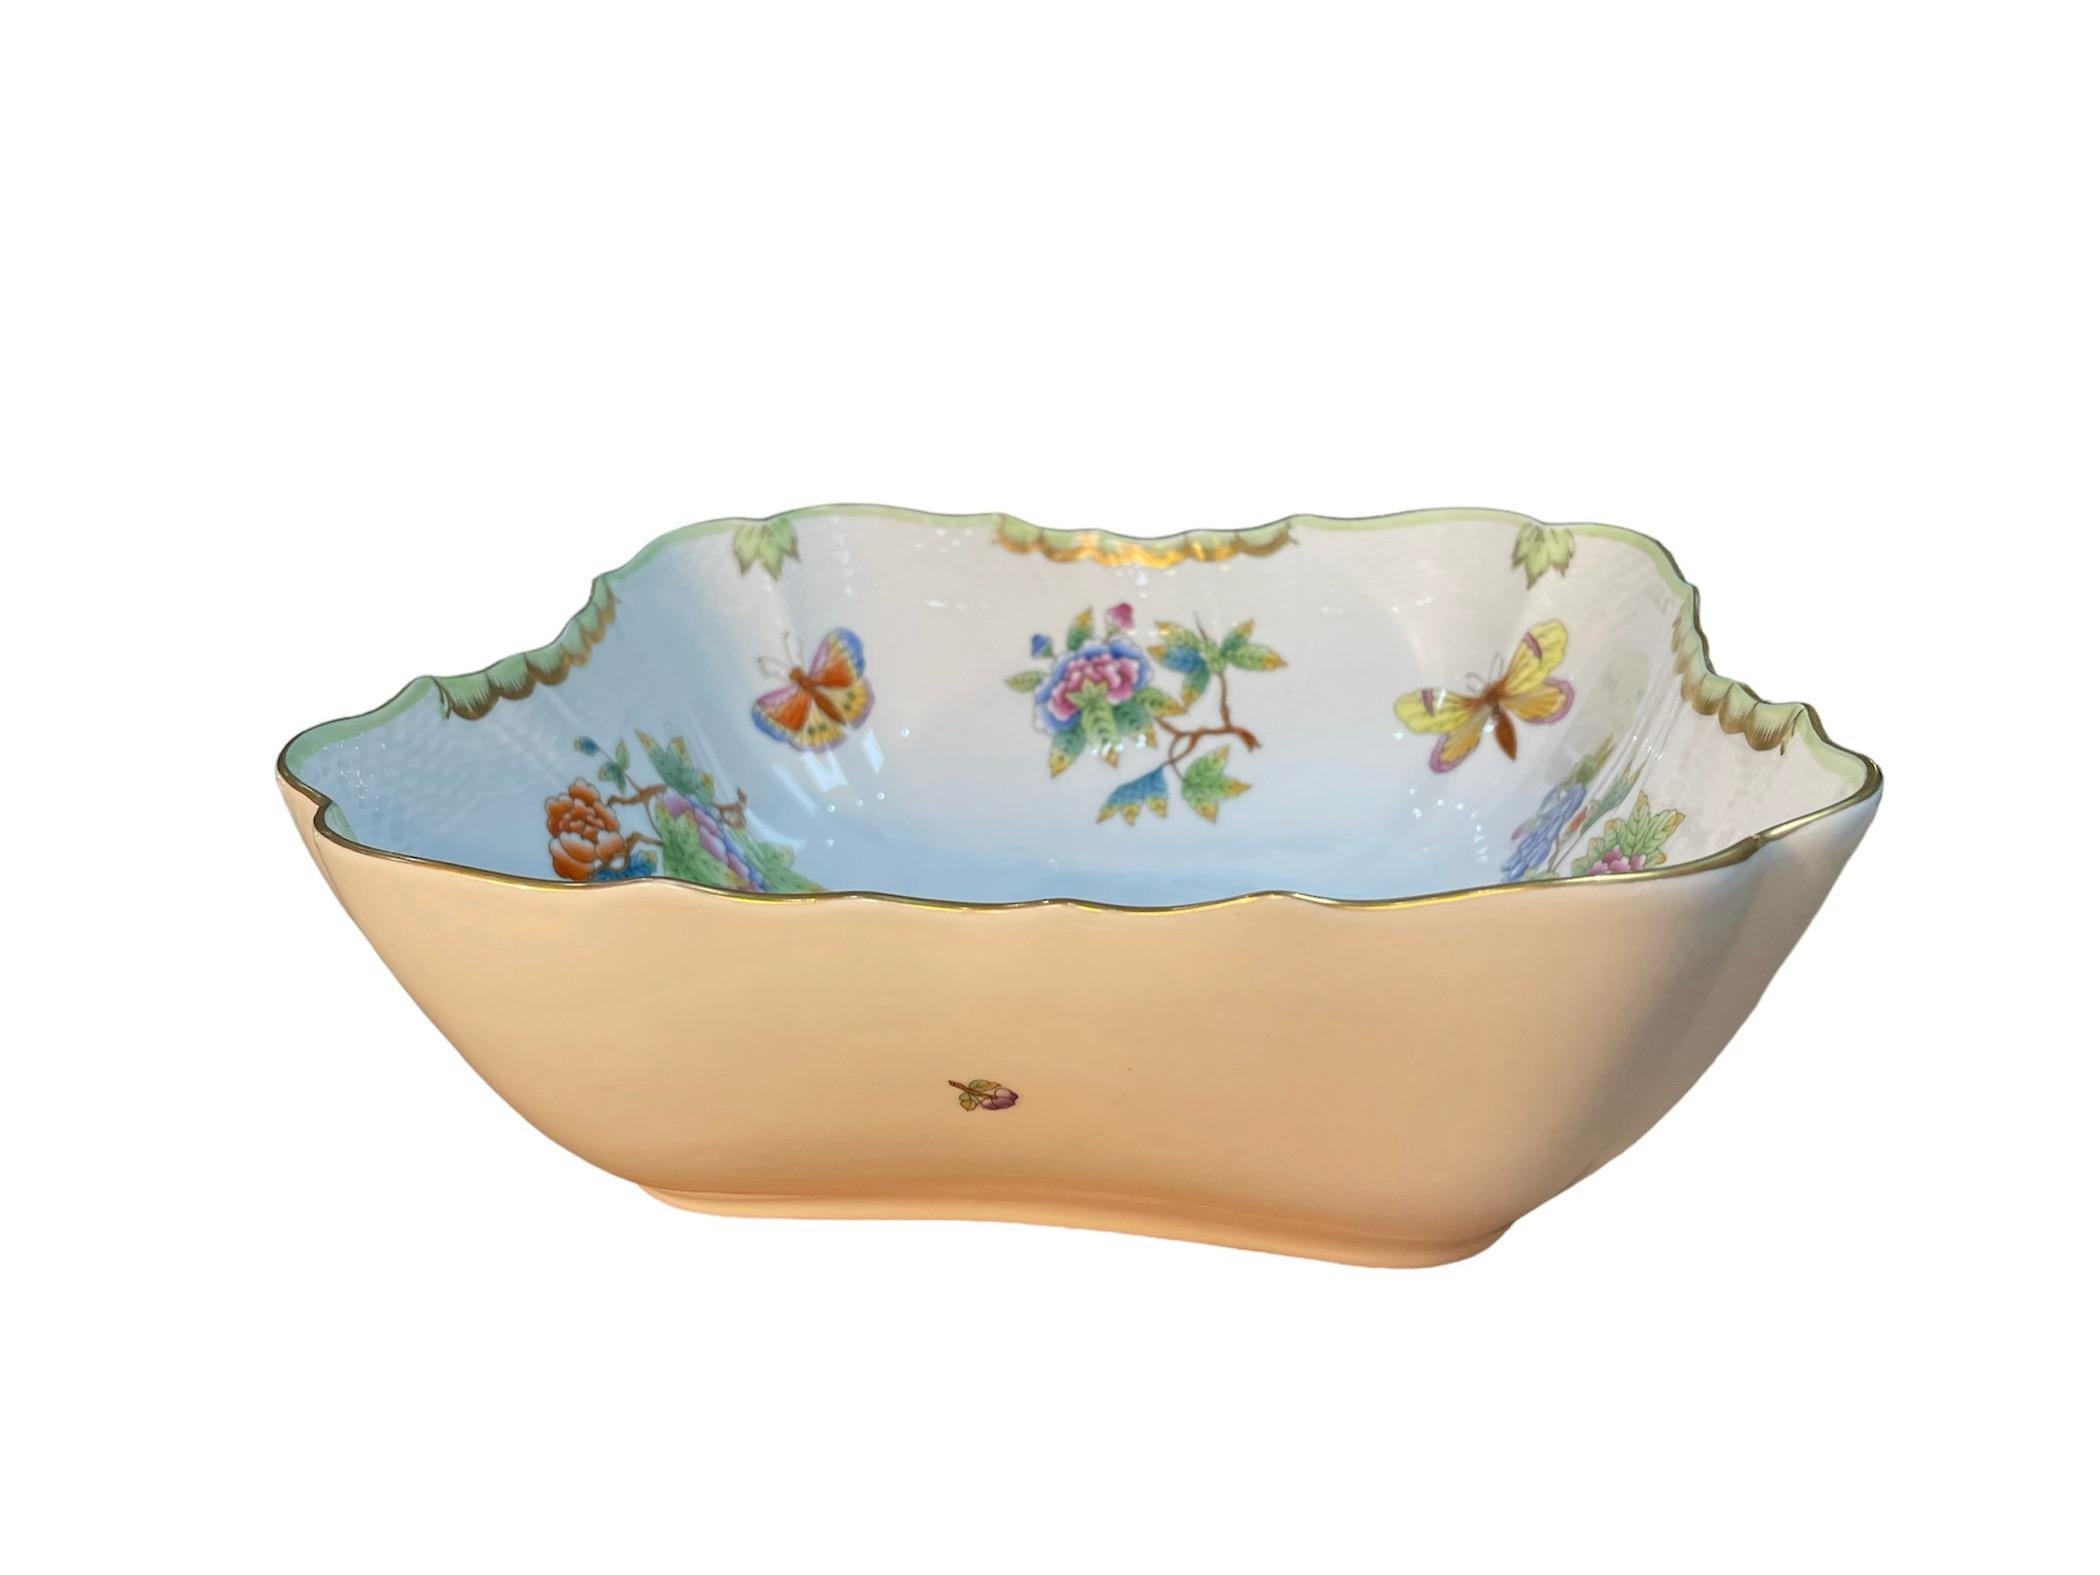 Herend Porcelain Queen Victoria Pattern Salad Bowl In Good Condition For Sale In Guaynabo, PR